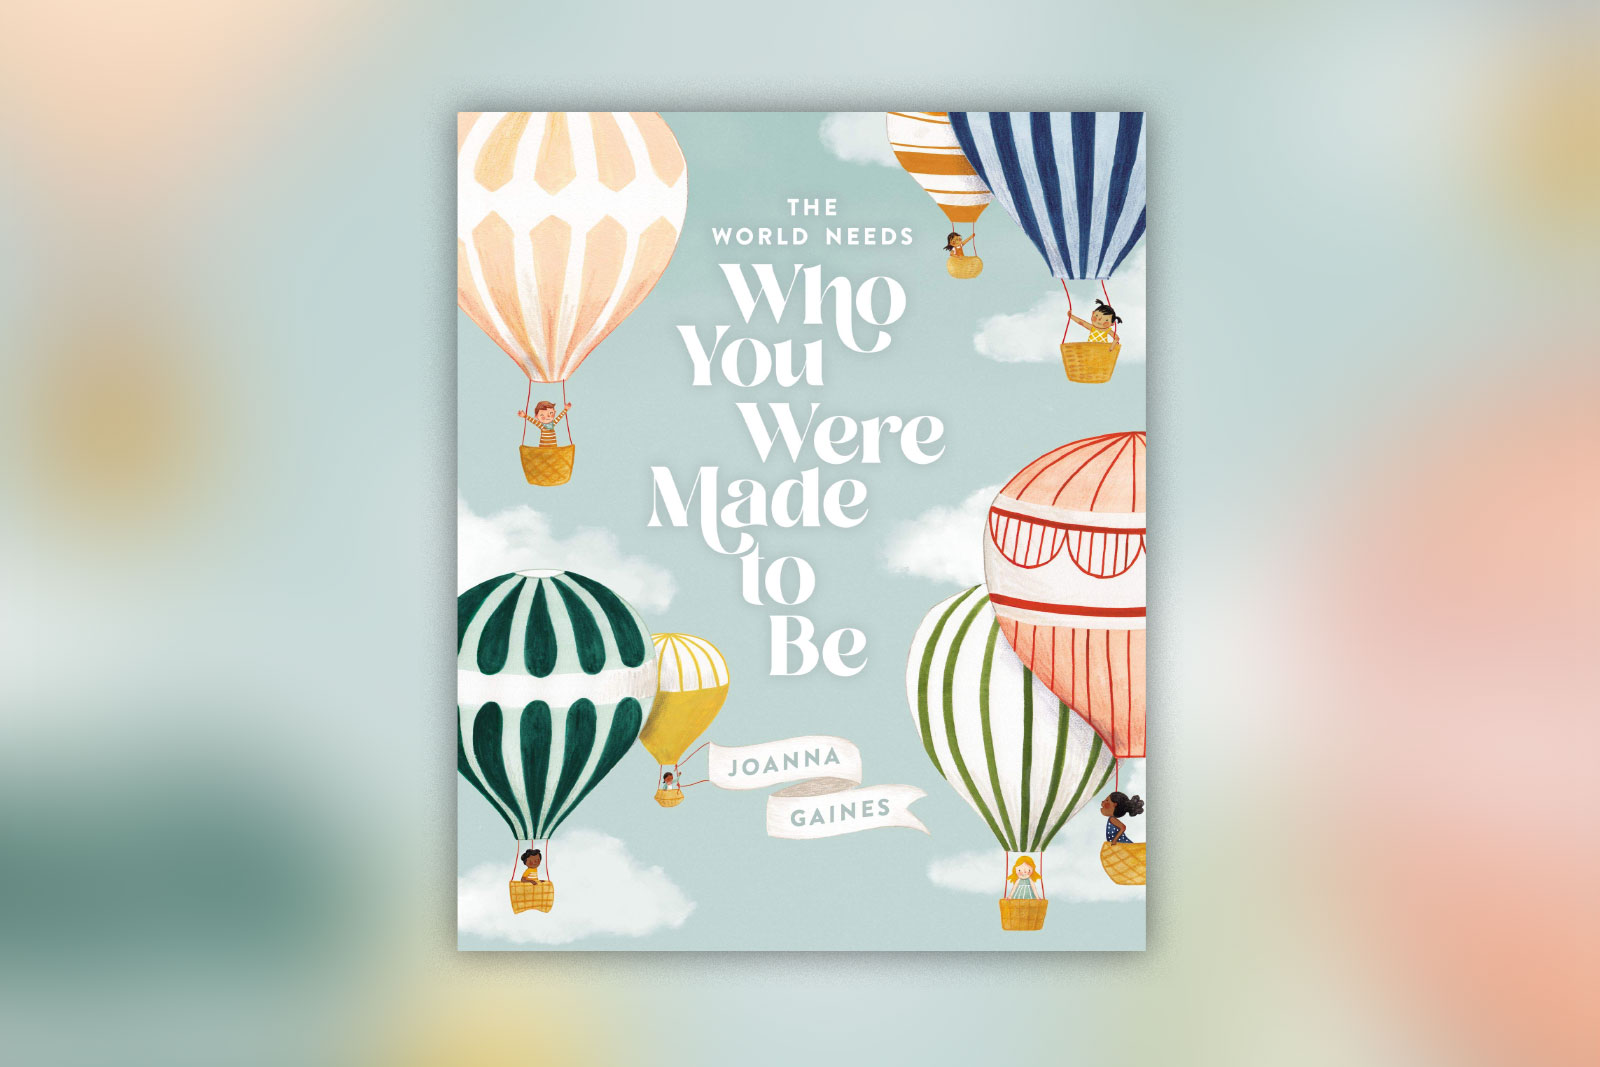 Book cover - Who you were made to be, lots of hot hair balloons